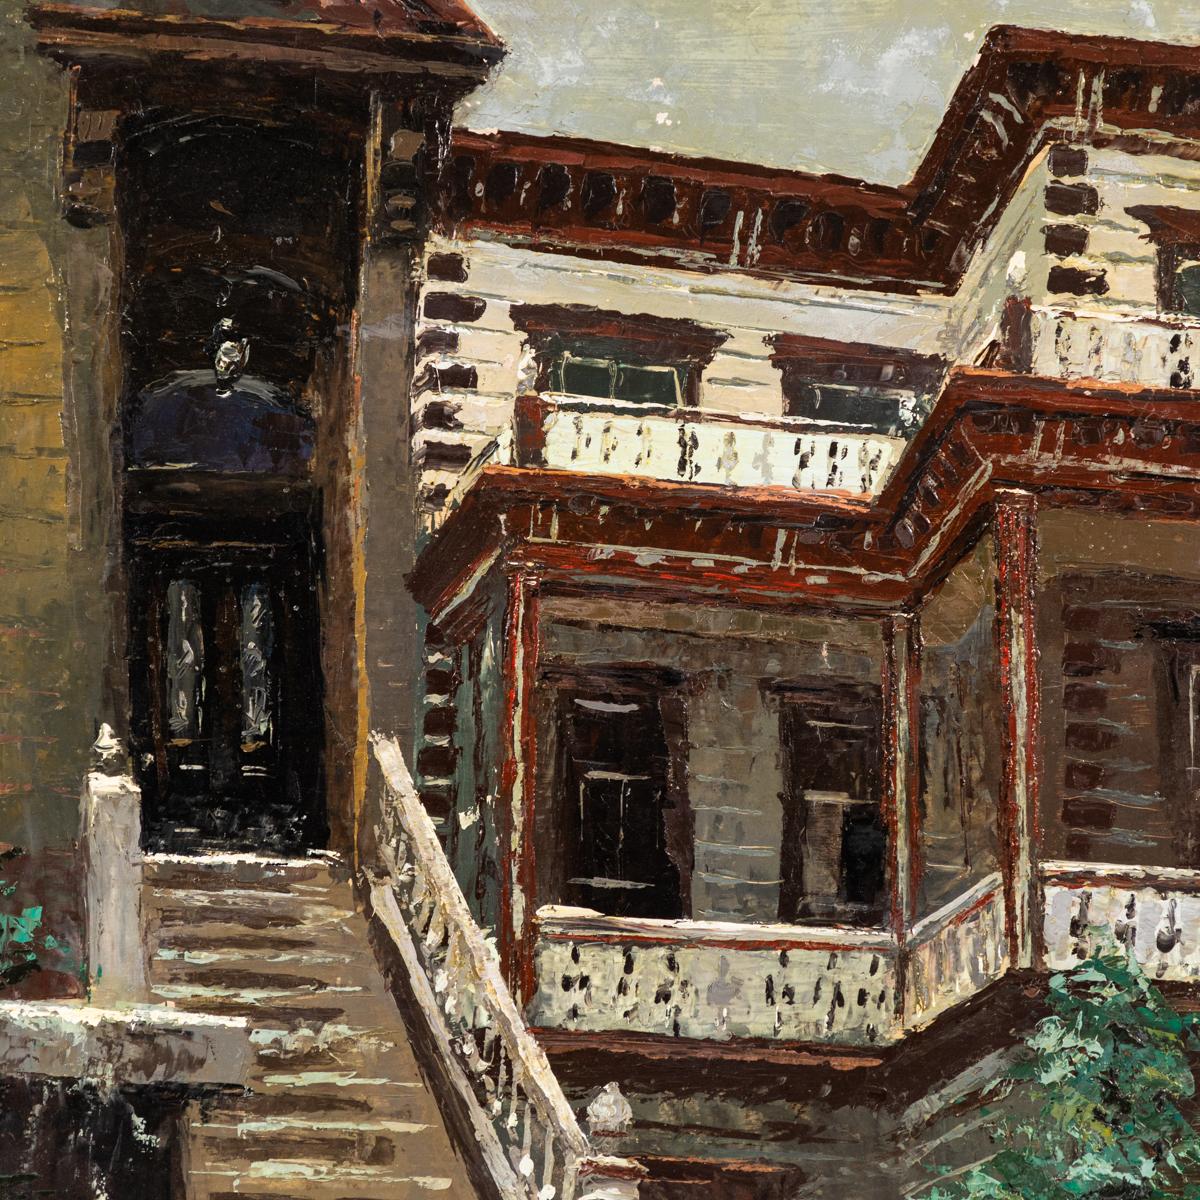 Oil on board painting by artist Roger Hayward (1899-1979), depicting the entrance to a Victorian-style home as seen from the street below. With a wonderful sense of proportion and scale, the artist has taken up a unique perspective, thereby imbuing